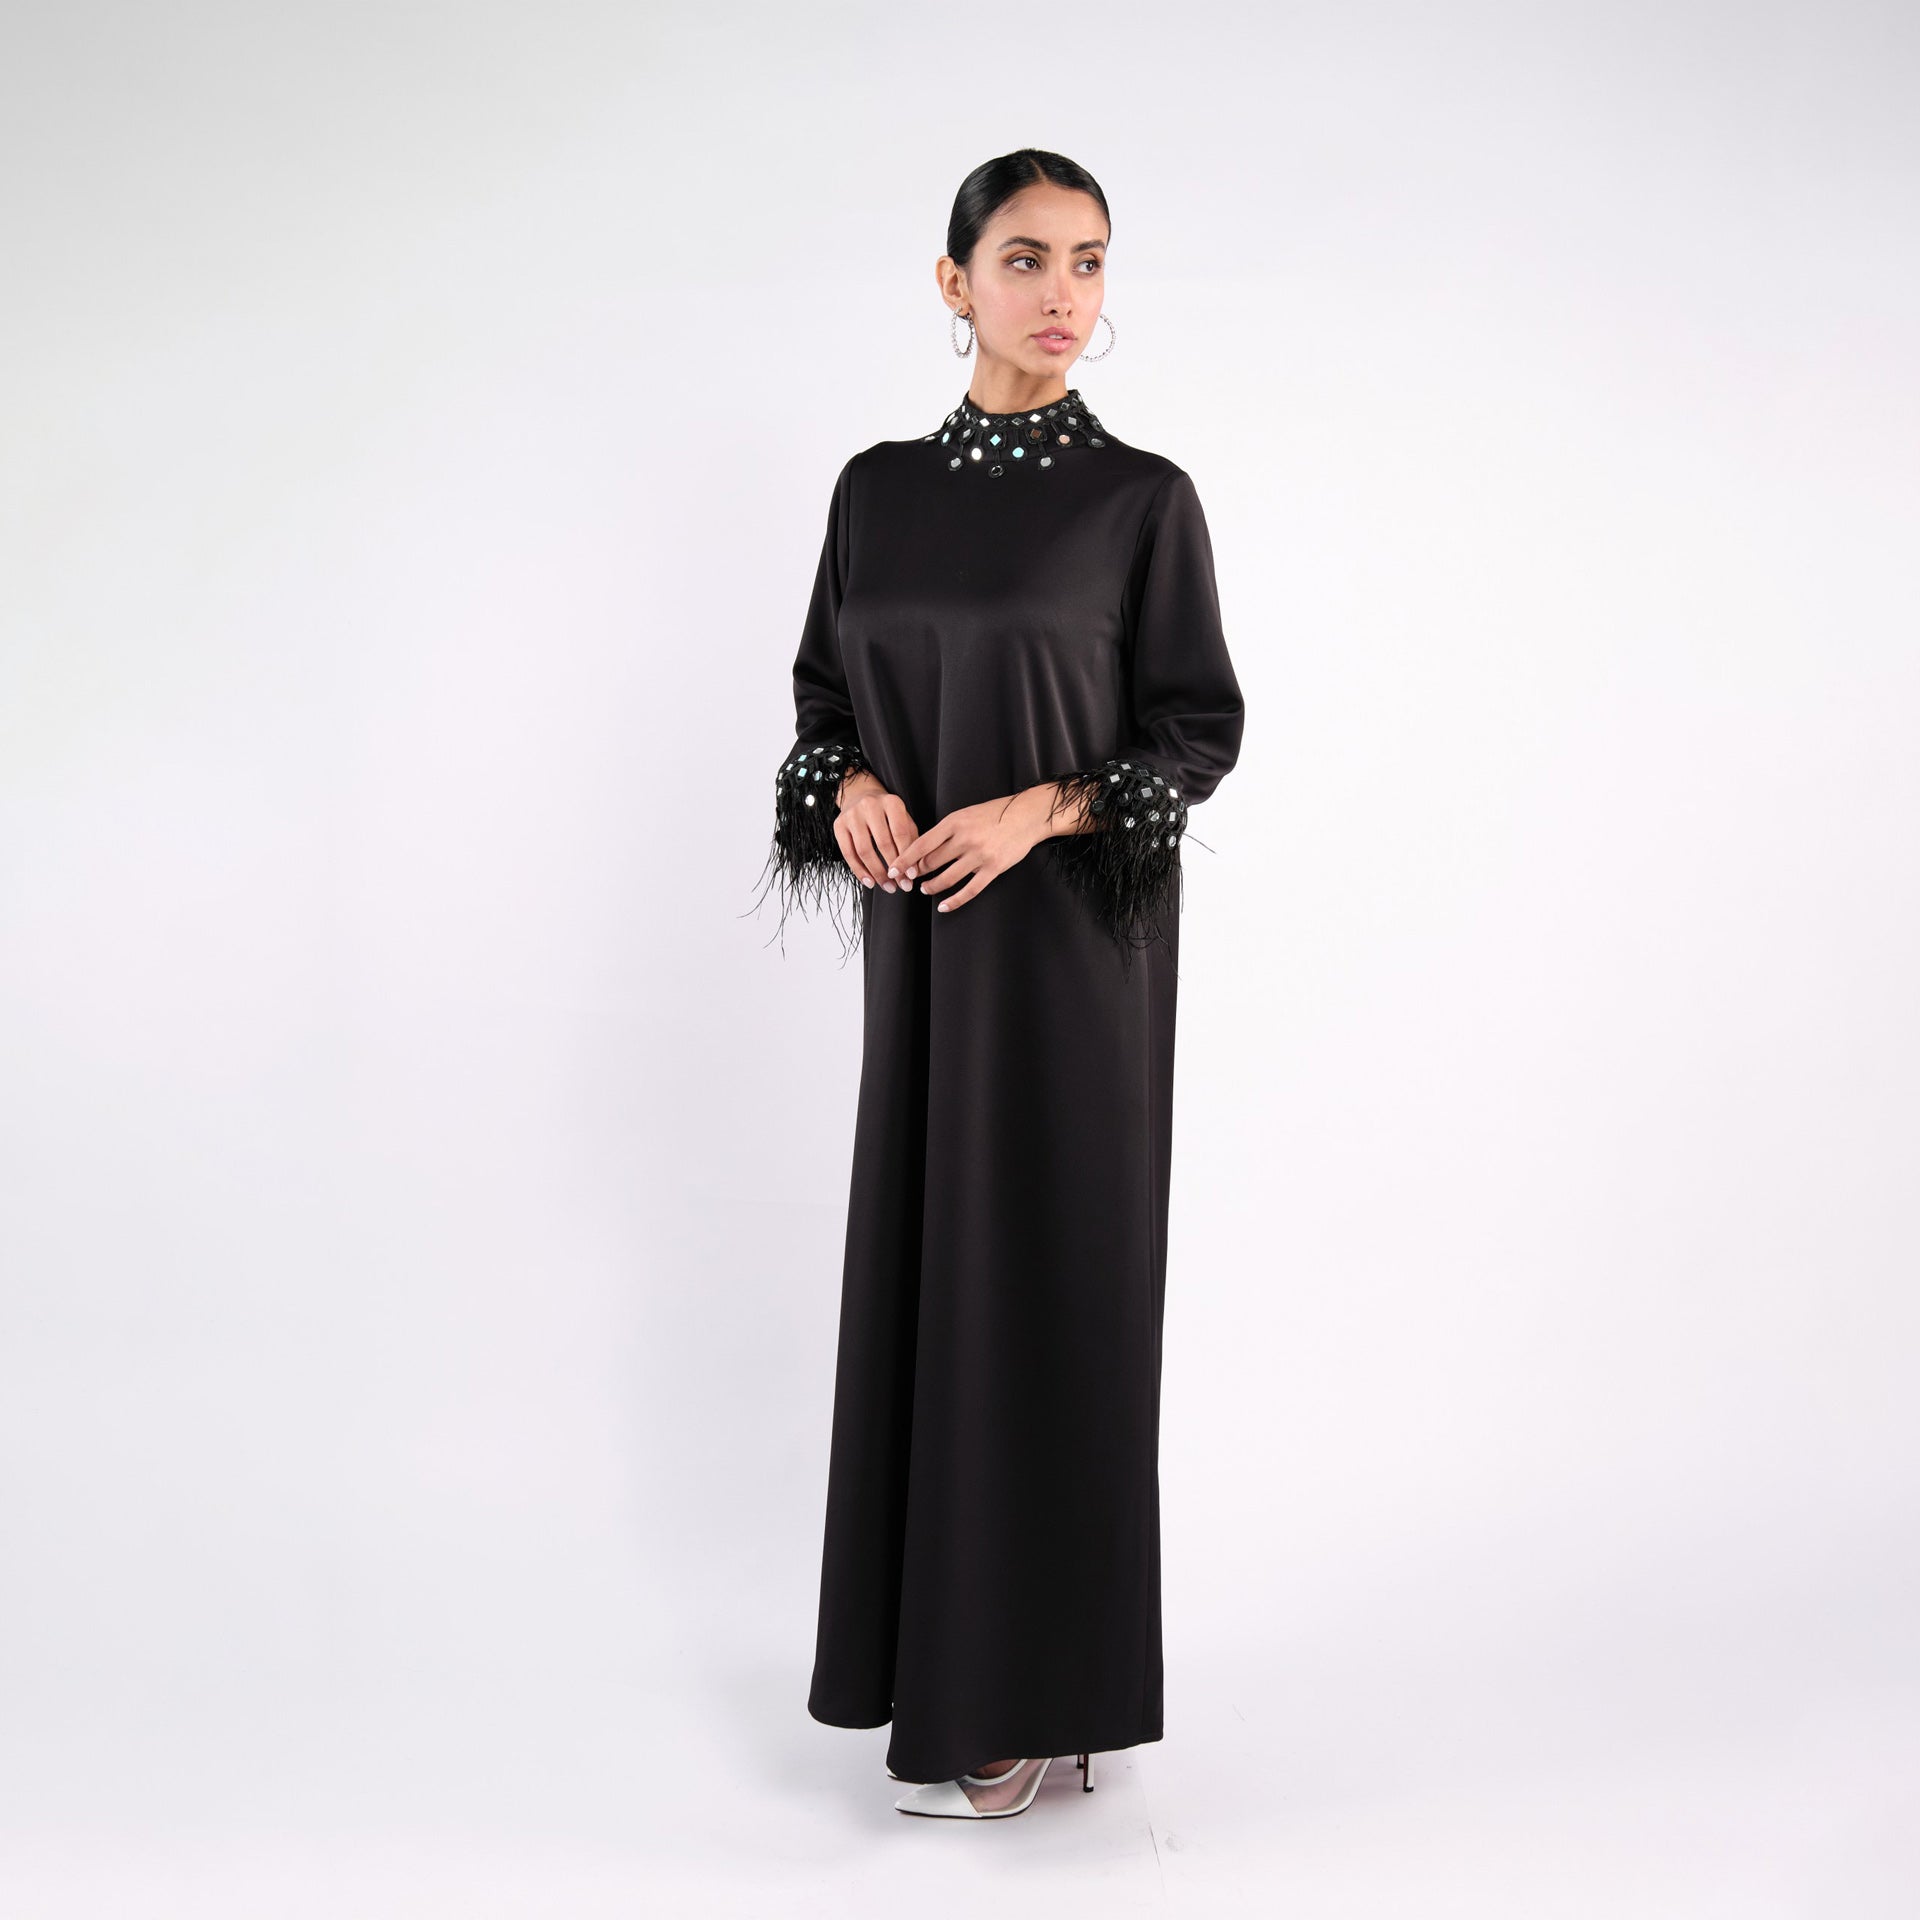 Black Plain Crepe Kaftan with Black Feather and Mirror Lace From Jouri By Rola